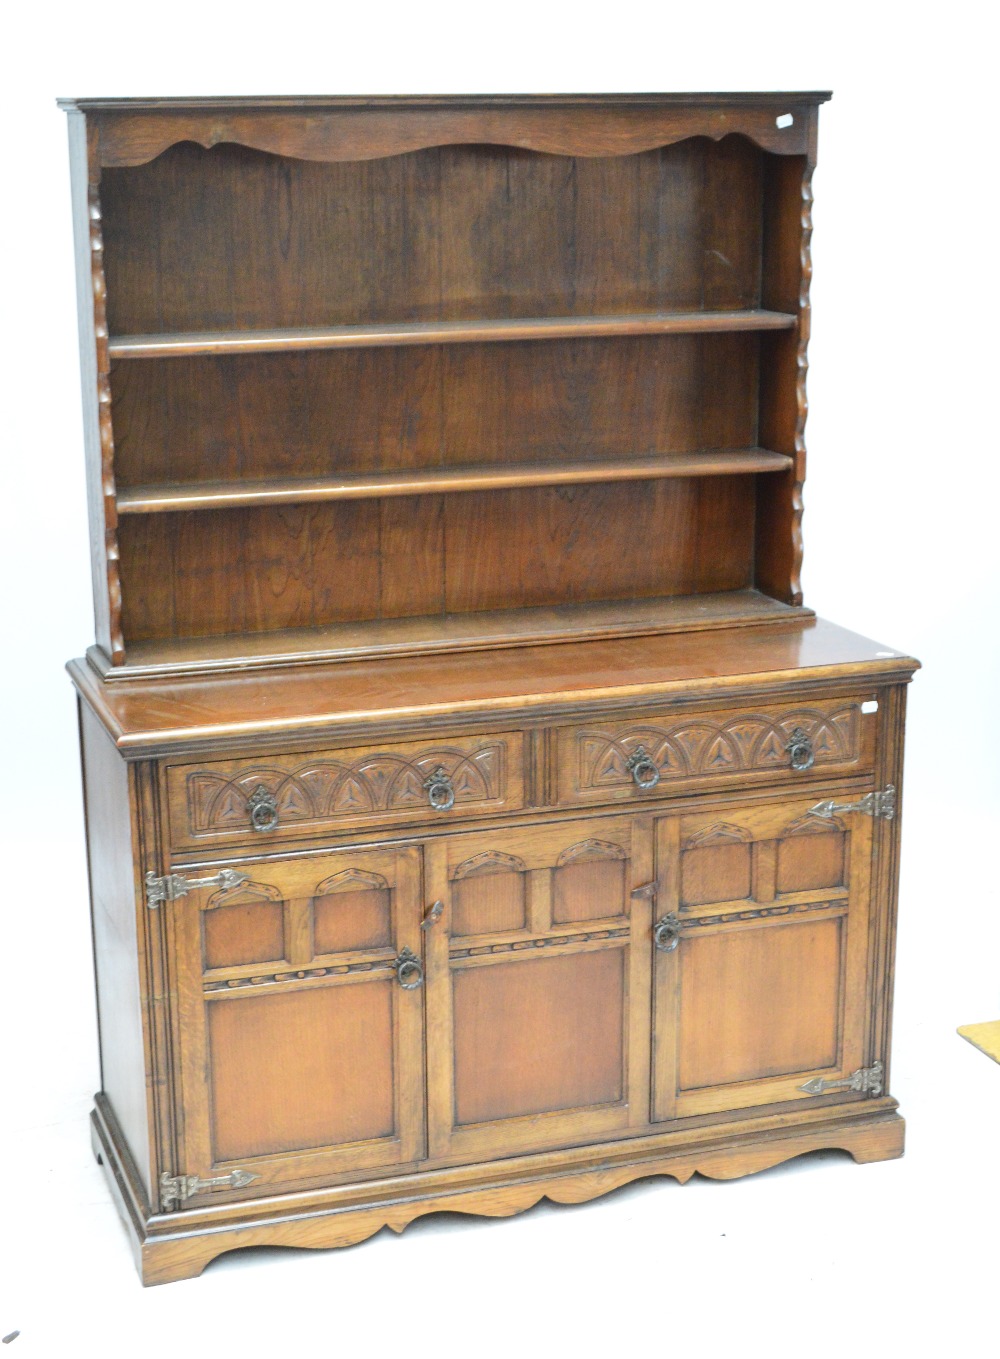 A reproduction oak dresser with boarded plate rack and carved detail.